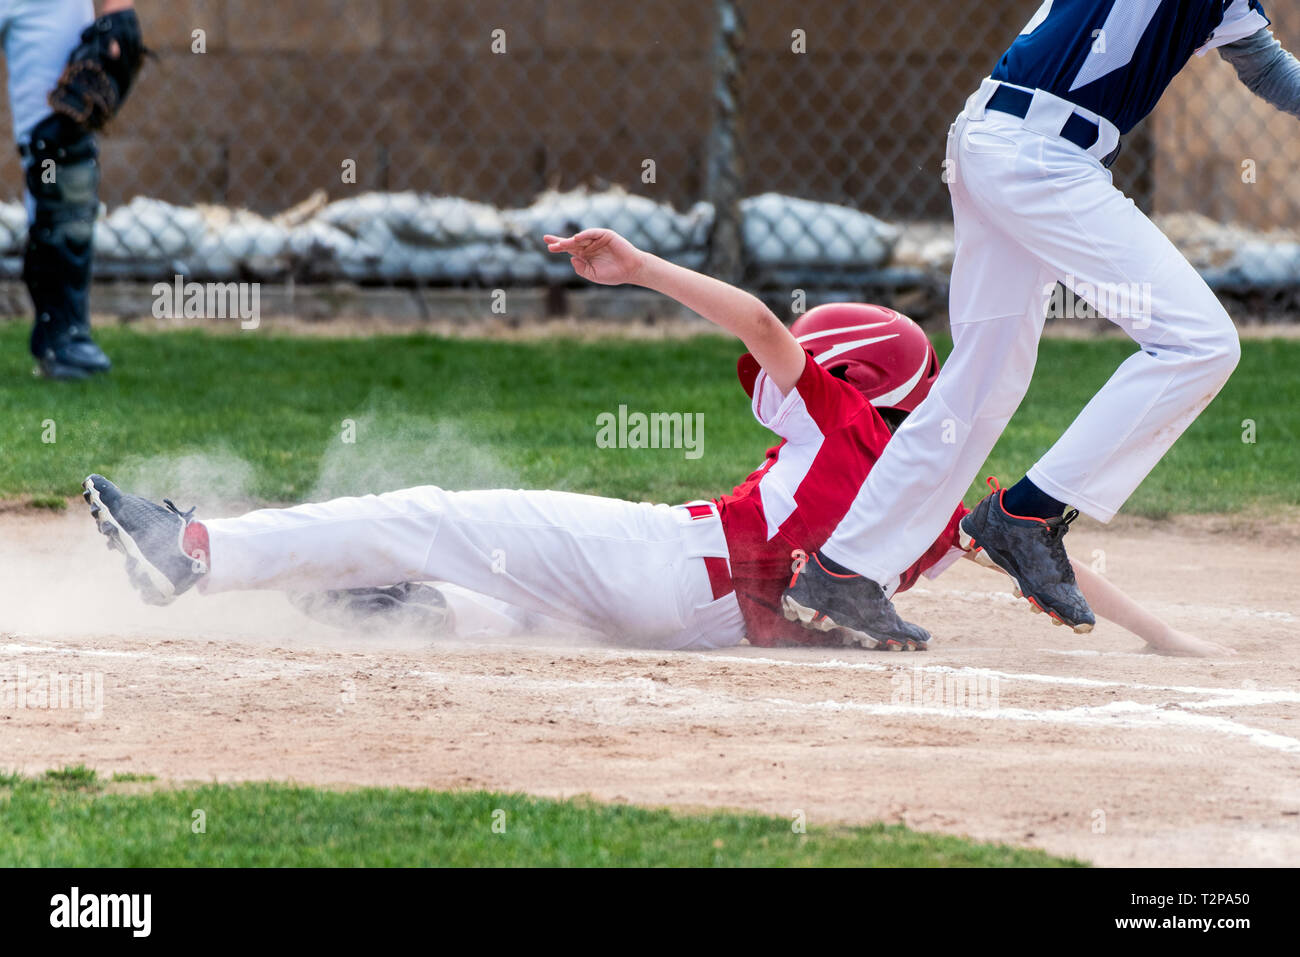 Youth baseball player in red uniform sliding safely into home plate in a cloud of dust during a game. Stock Photo